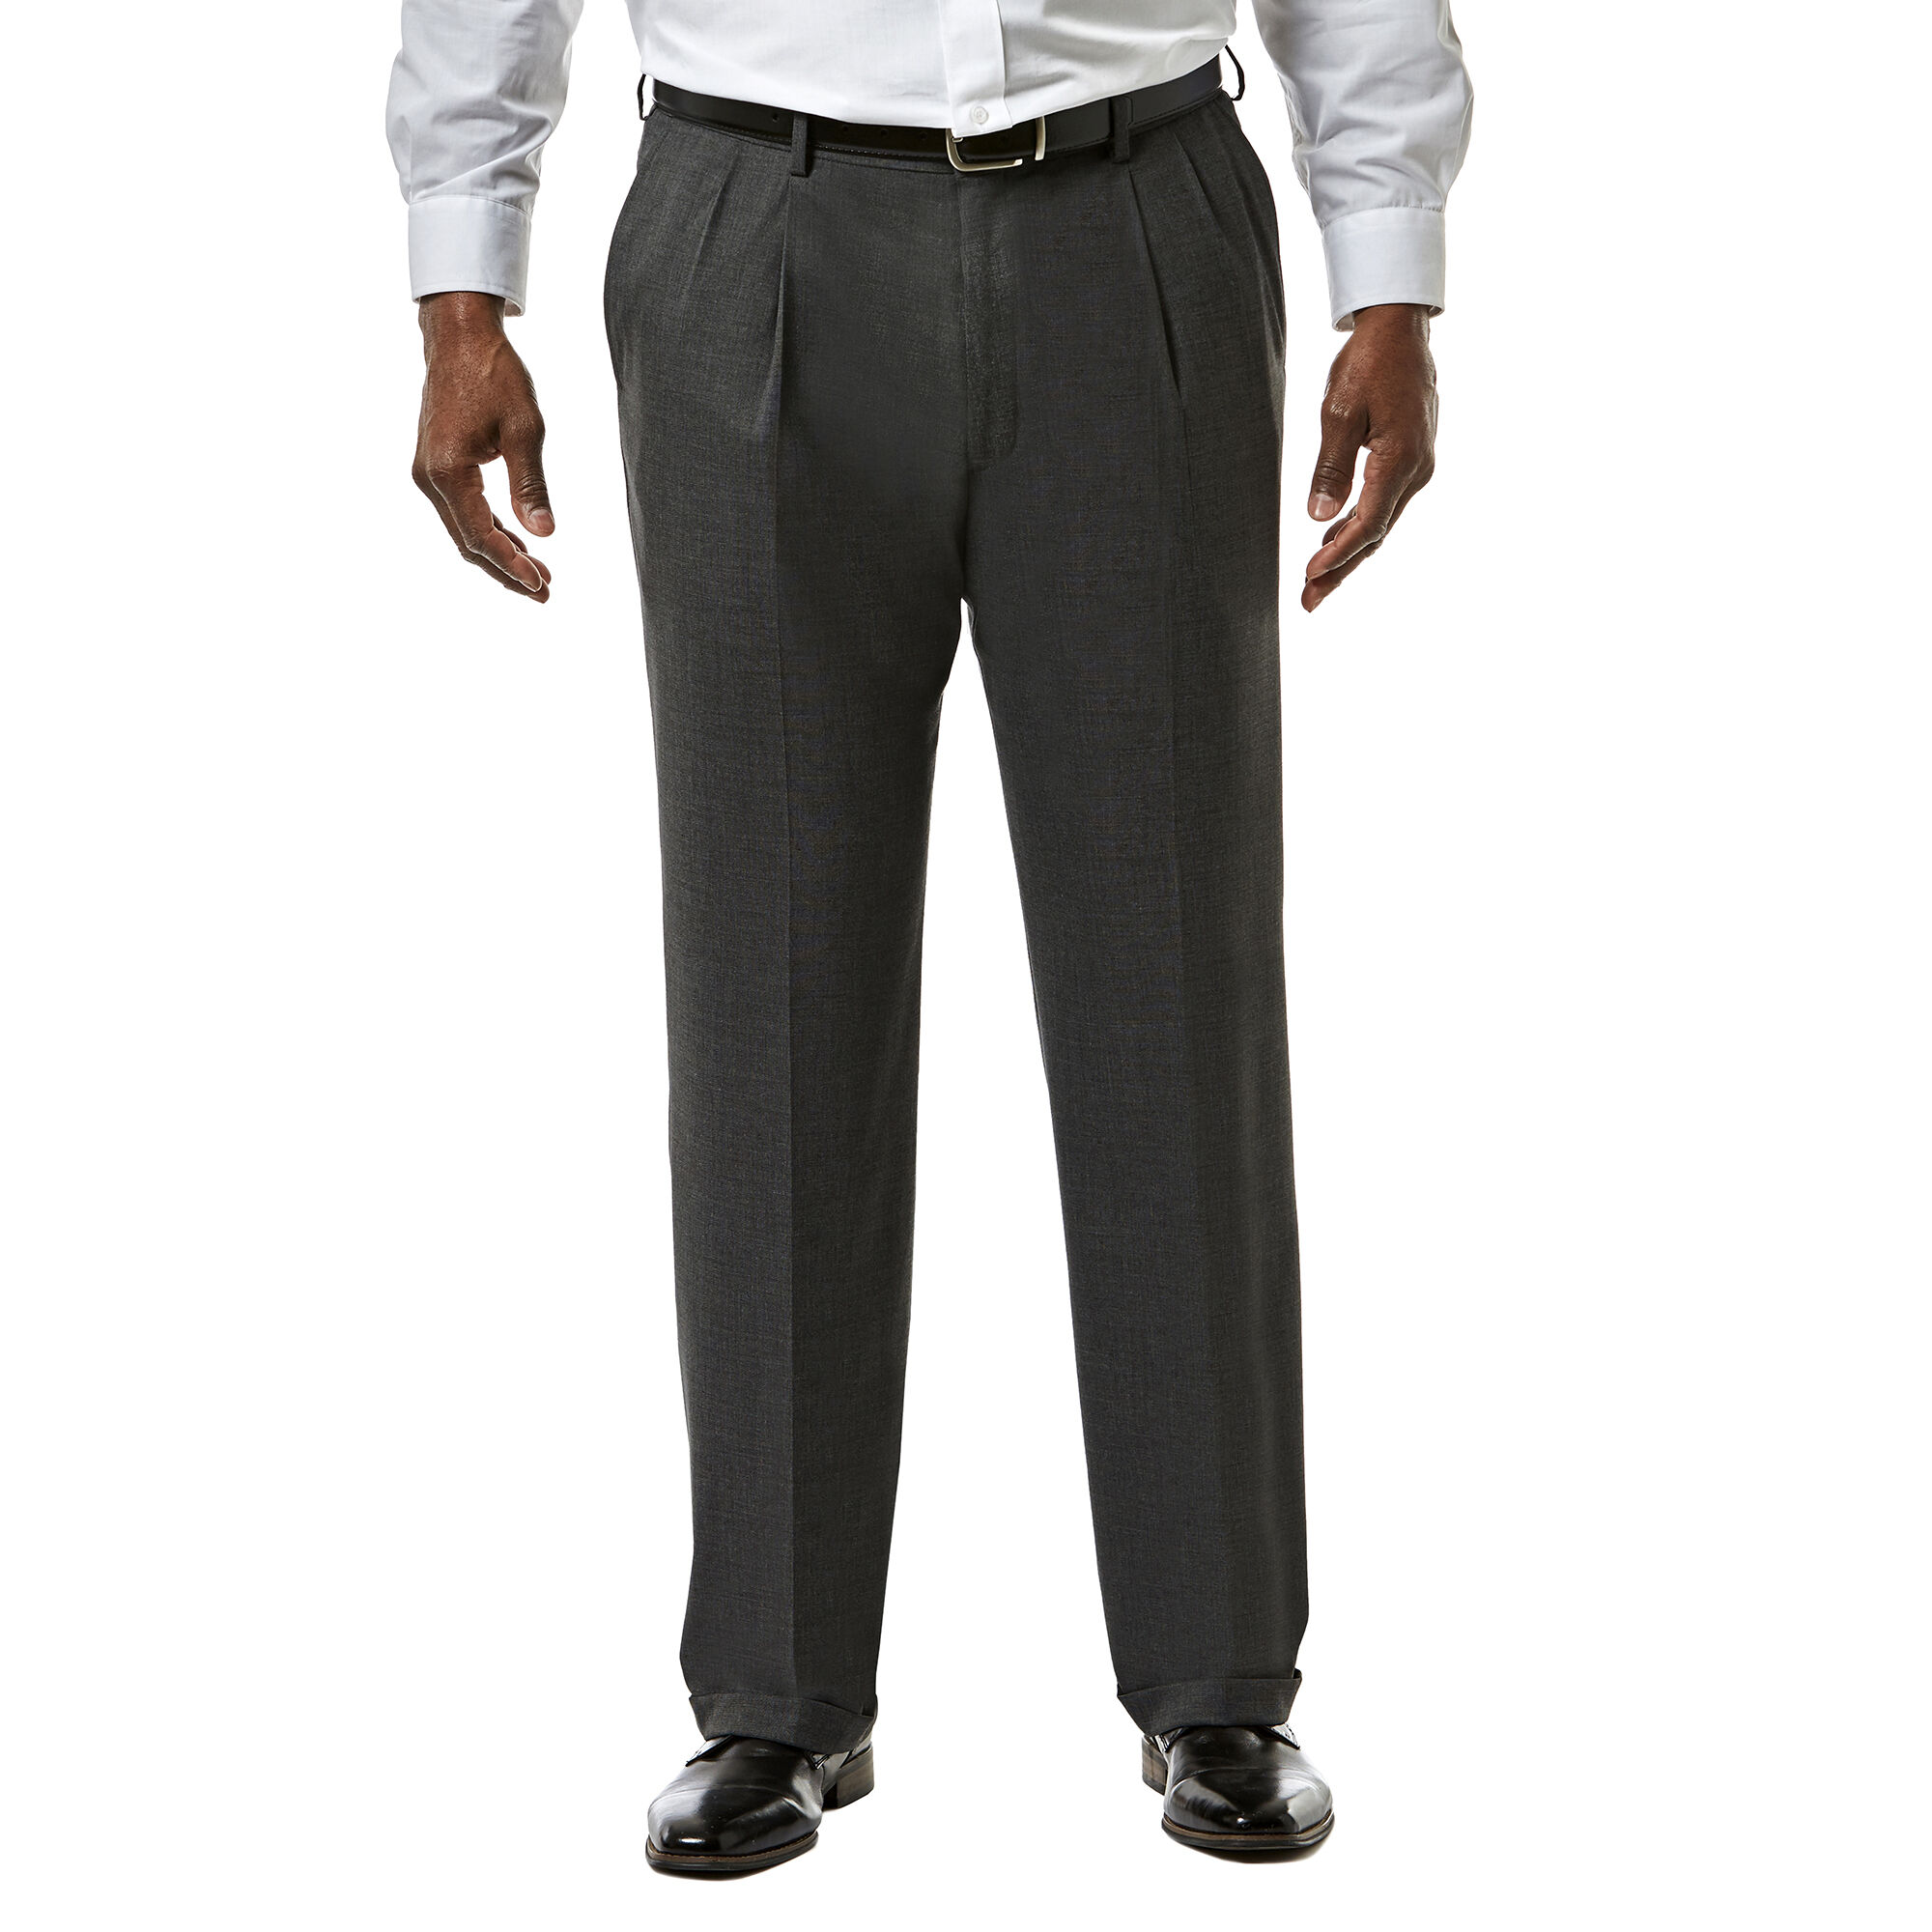 Big & Tall J.M. Haggar Premium Stretch Suit Pant - Pleated Front Dark Heather Grey Big & Tall Classic Fit Pleated Front Hidden Expandable Waistband: Expands up to 3" 64% Polyester, 34% Viscoe Rayon 2% Spandex Dry Clean Only Imported Style #: HY91182 Size - XXL